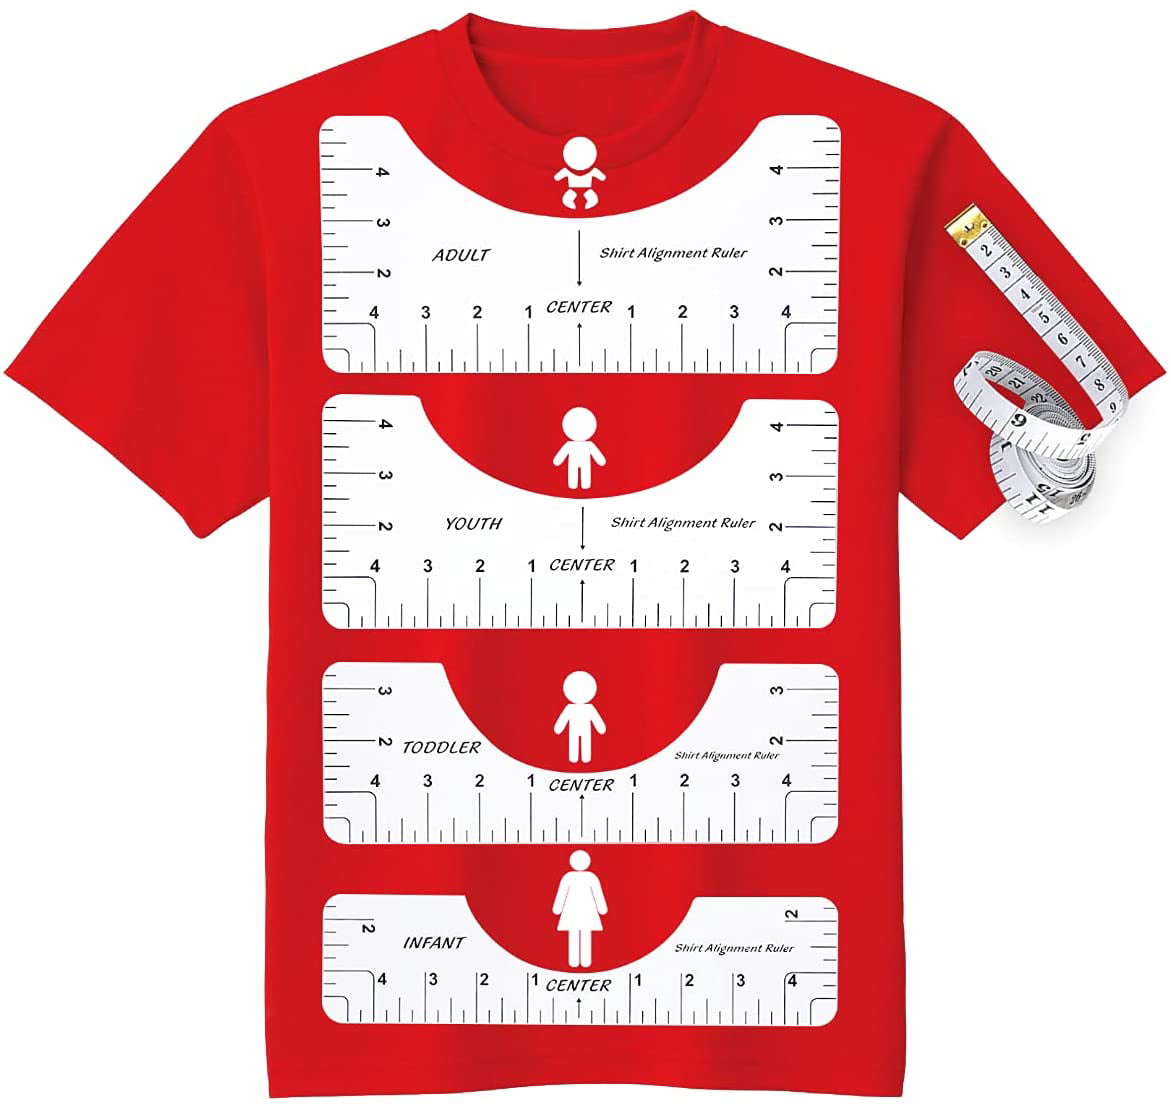 OICGOO 5 Piece T-Shirt Alignment Ruler with Measuring Tape T-Shirt Alignment Guide PVC T-Shirt Alignment Ruler to Center Vinyl Guiding Tool for Making Fashion Center Design 